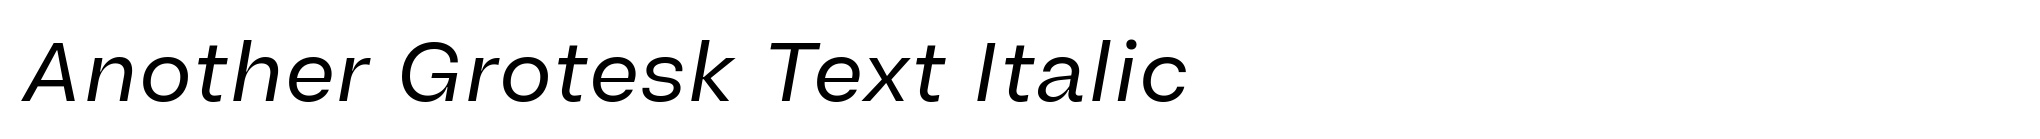 Another Grotesk Text Italic image